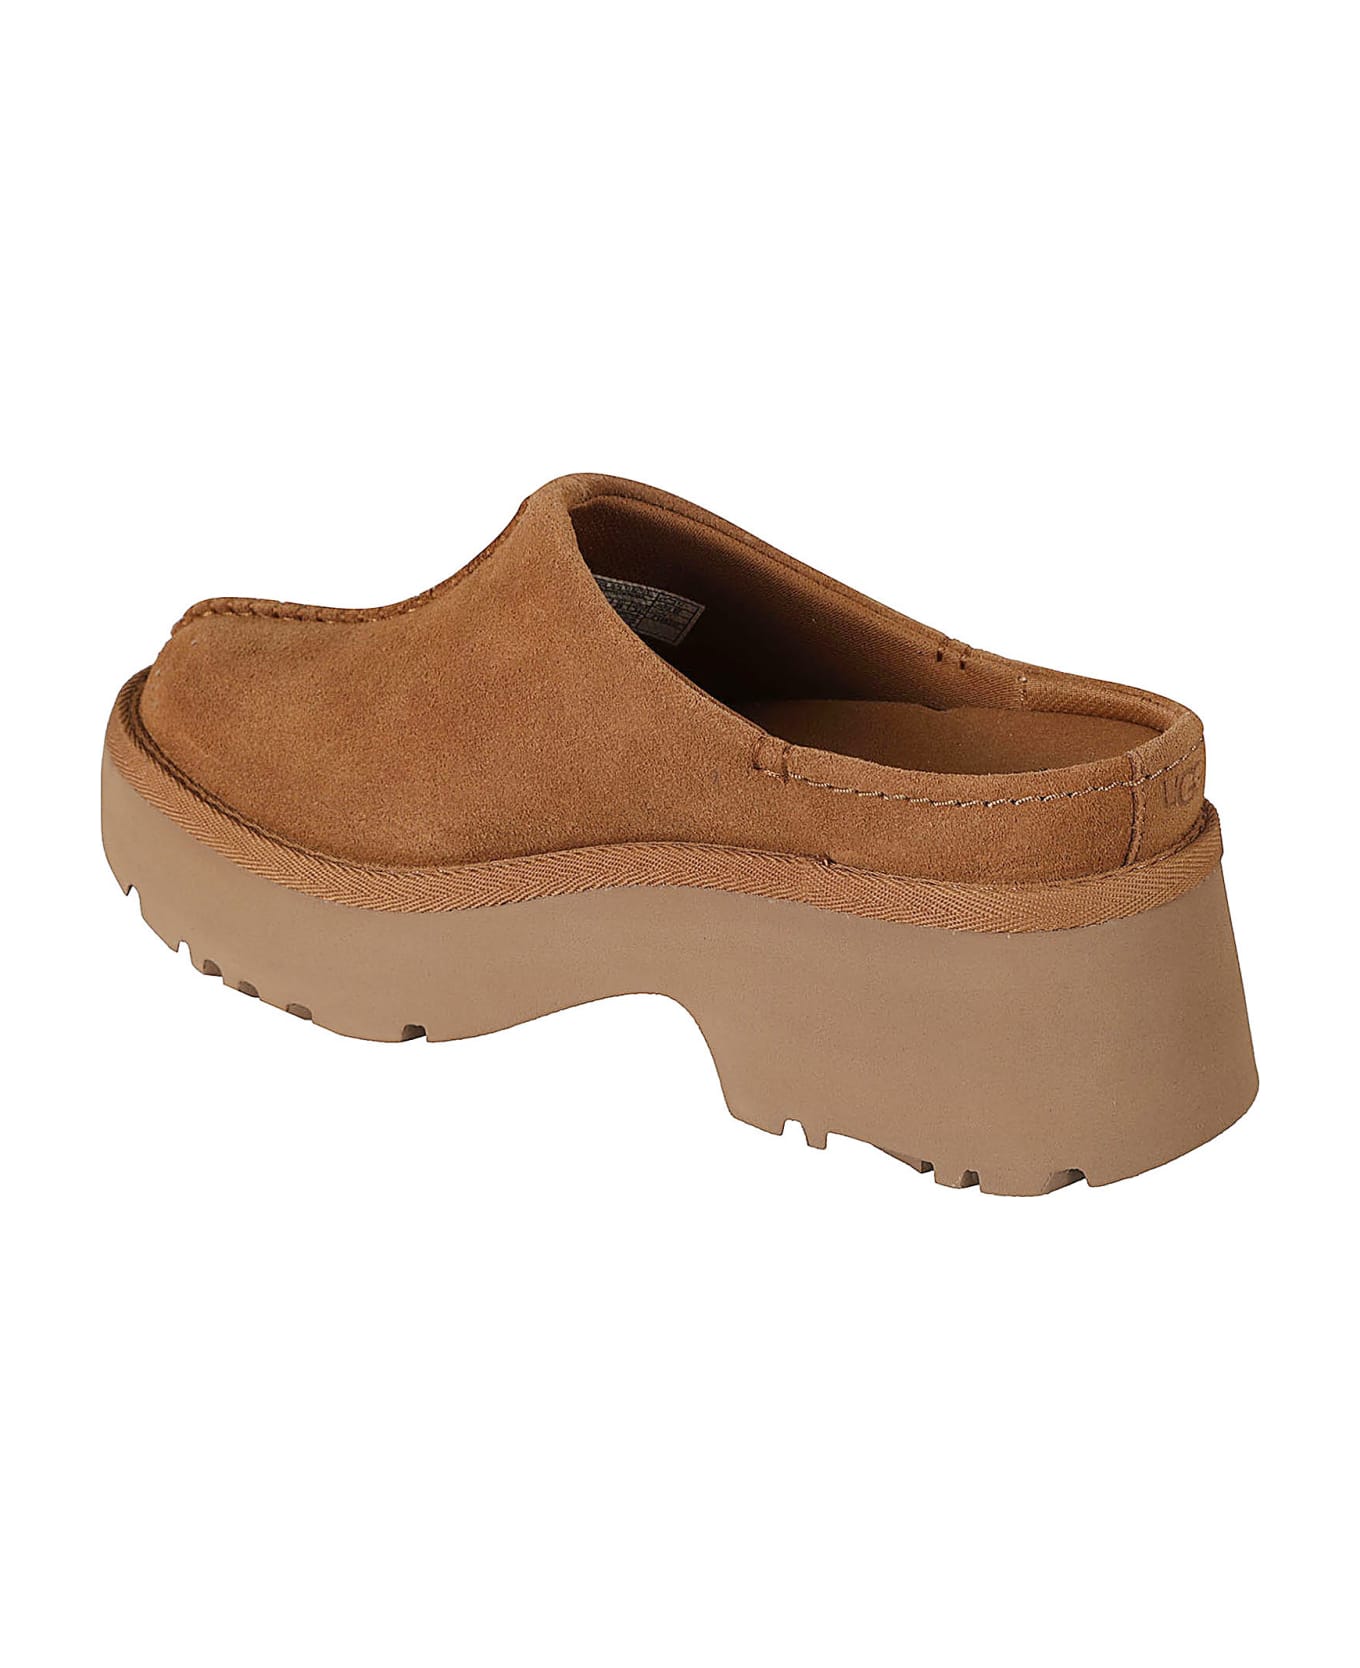 UGG New Heights Clogs - CHESTNUT サンダル